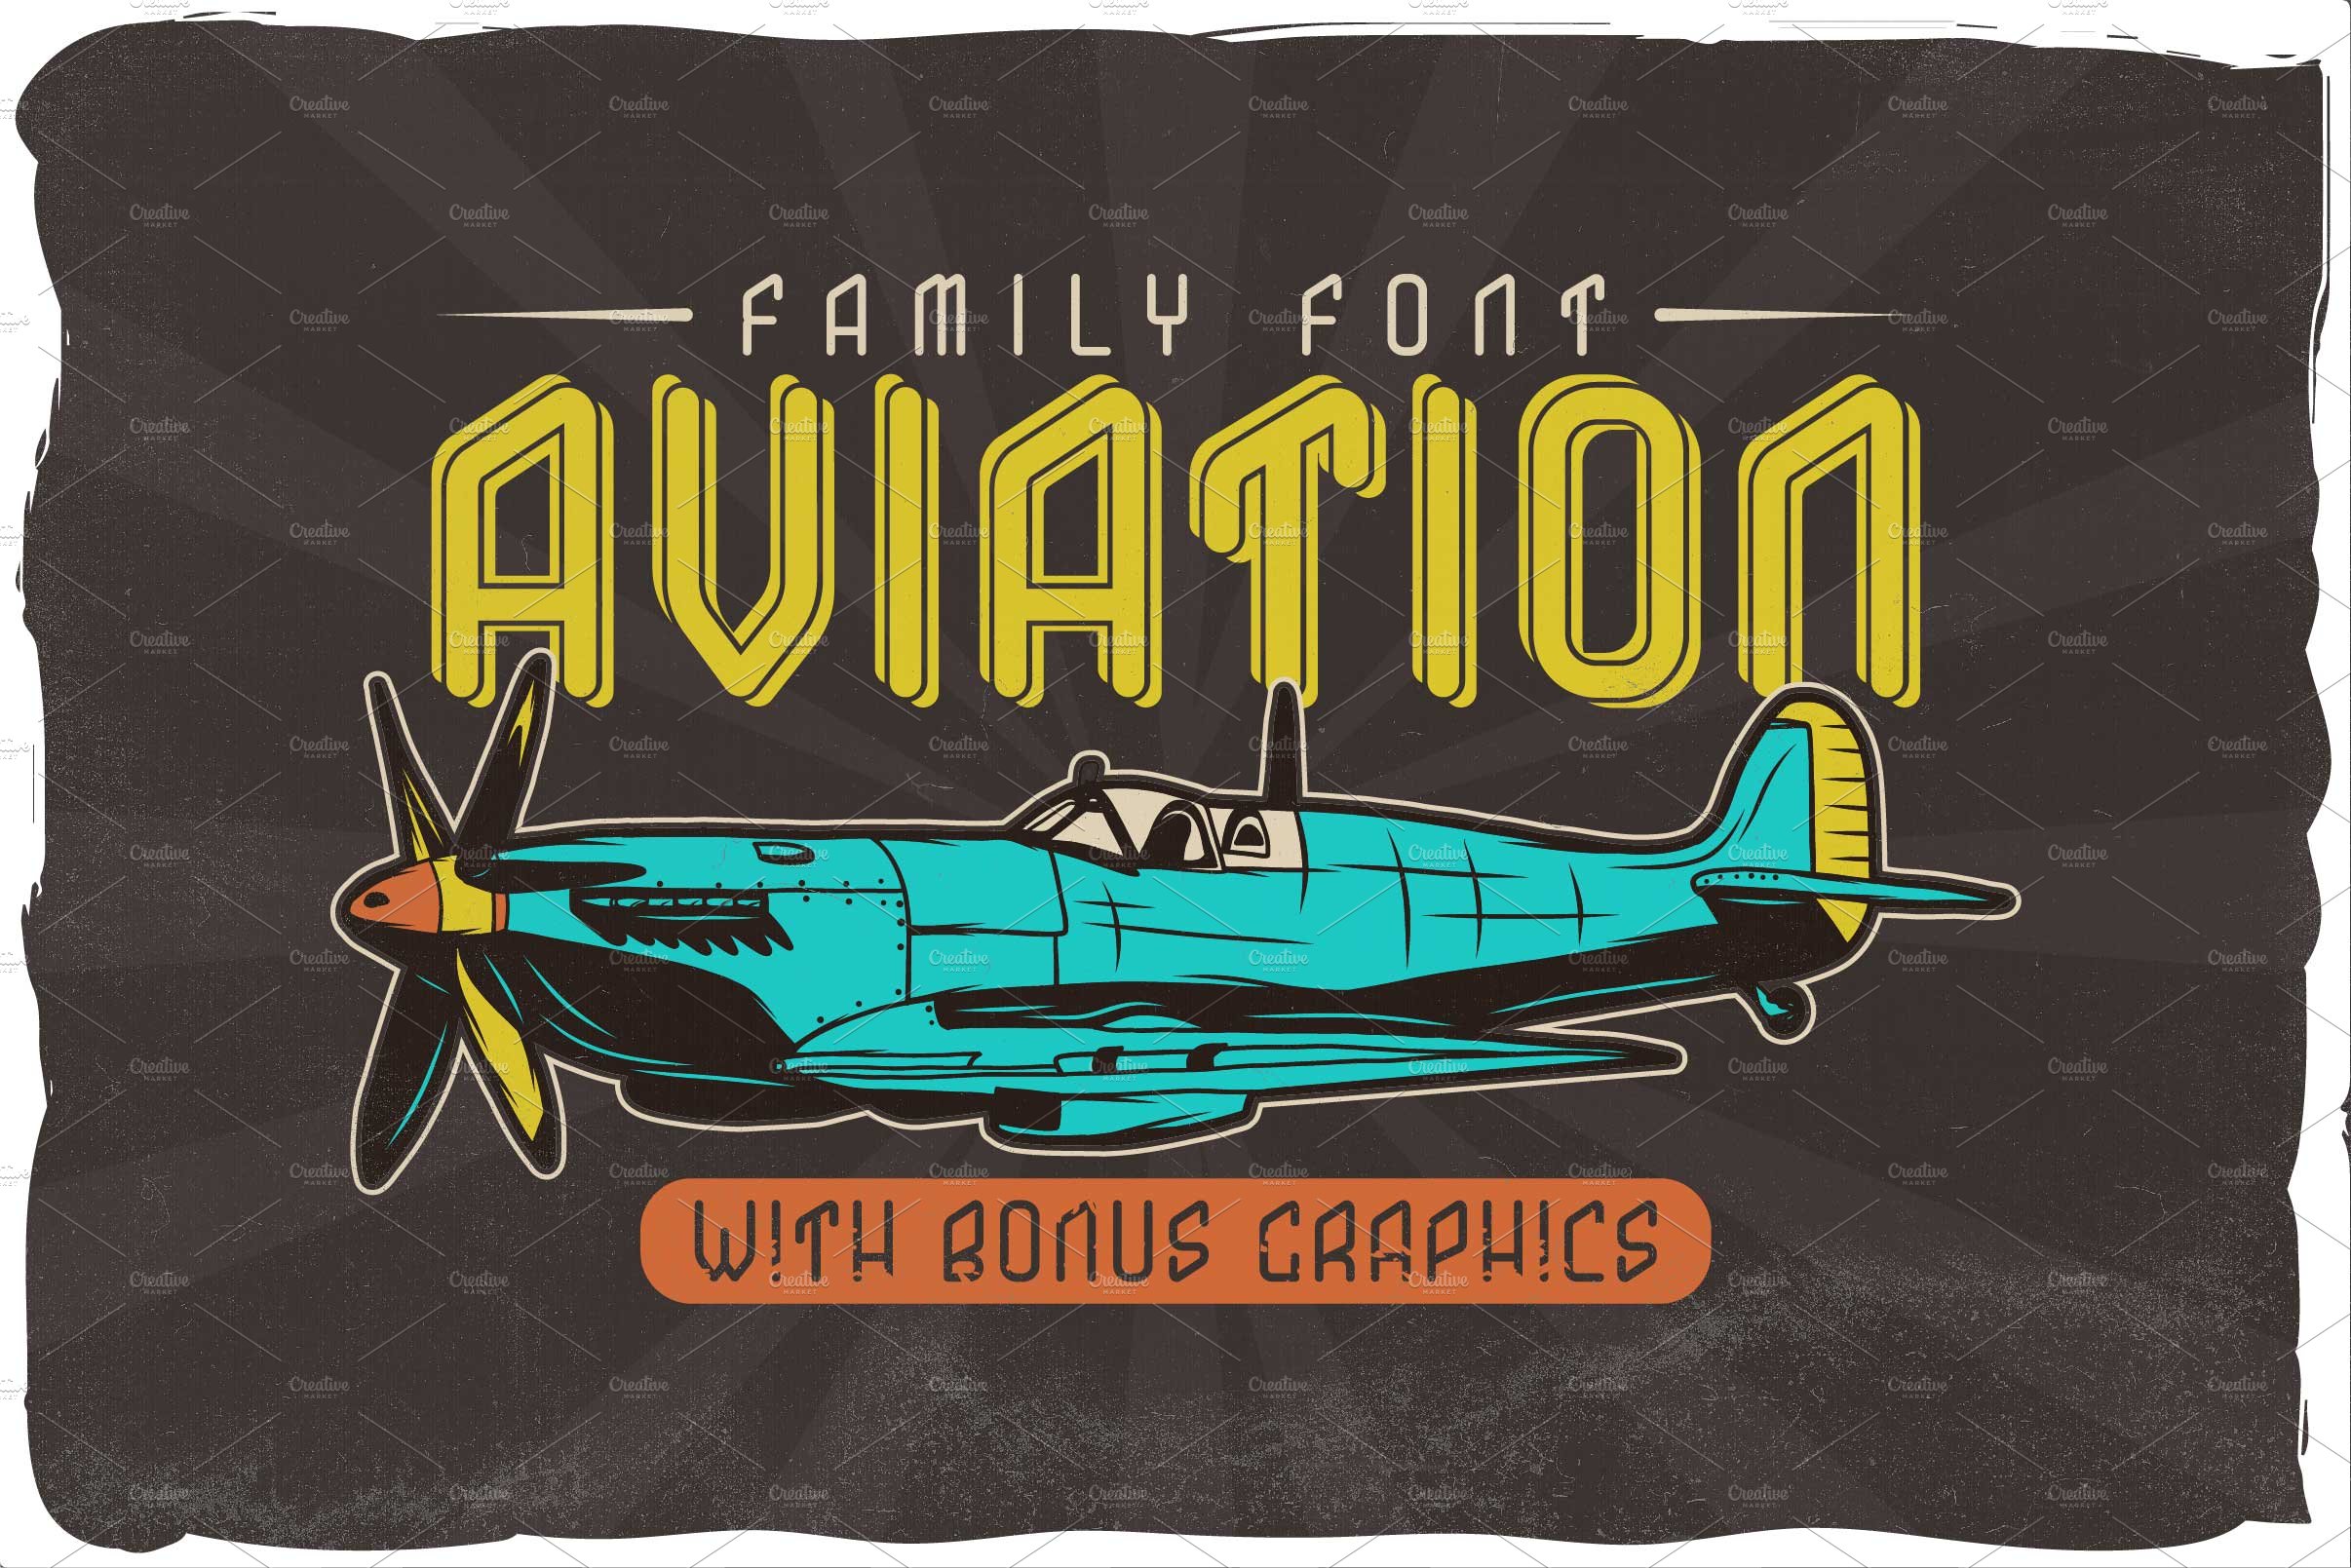 Aviation Font cover image.